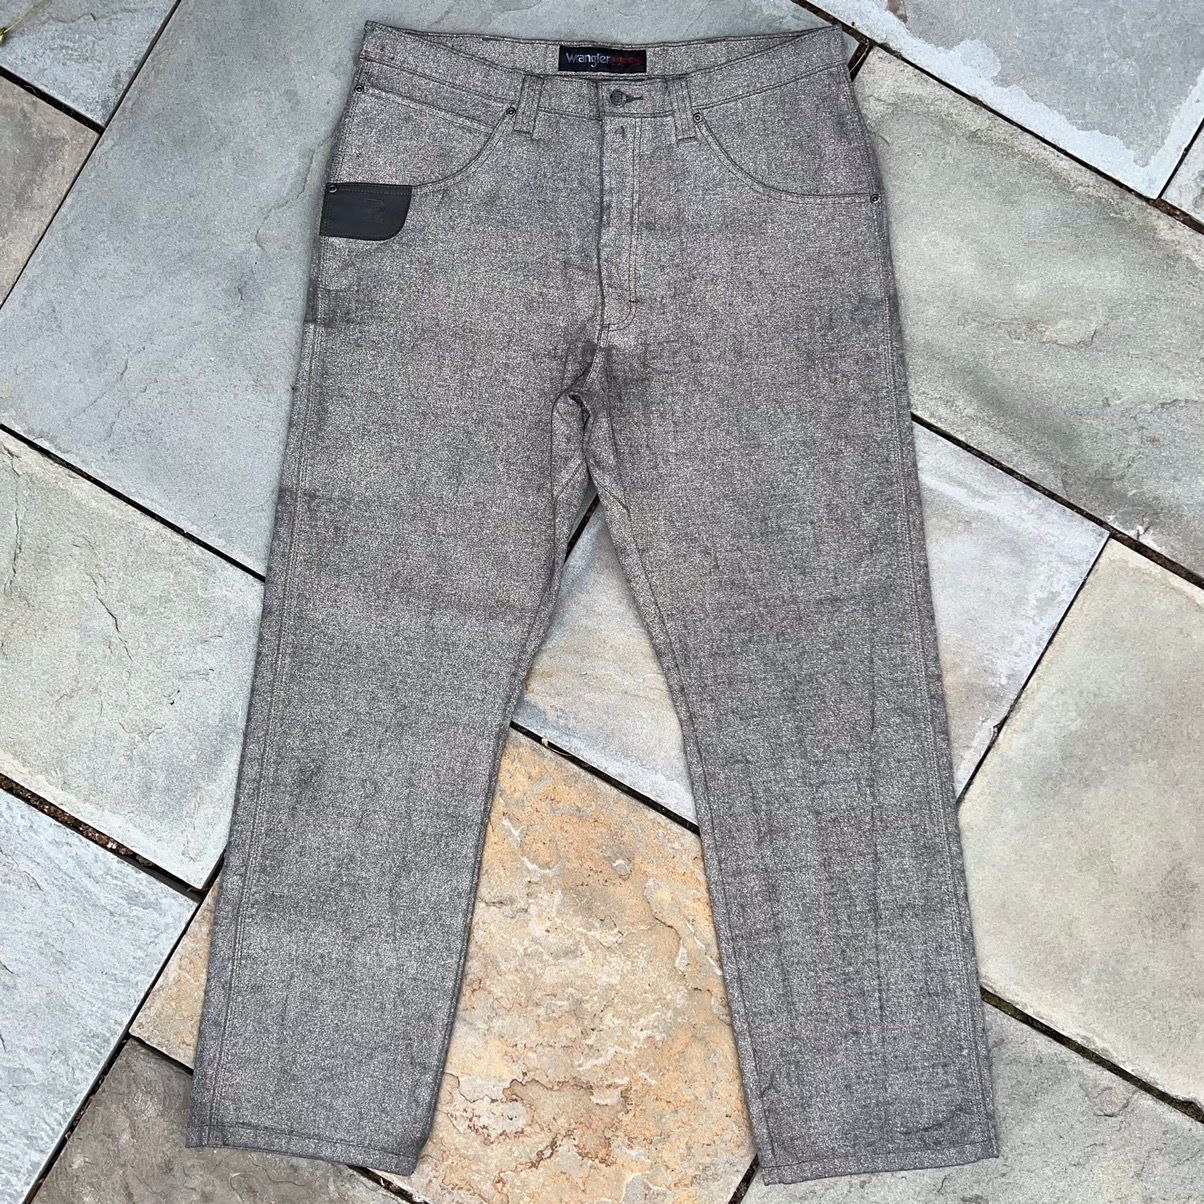 Custom Upcycled Reworked Ripstop Utility Work Pants Size US 36 / EU 52 - 8 Preview